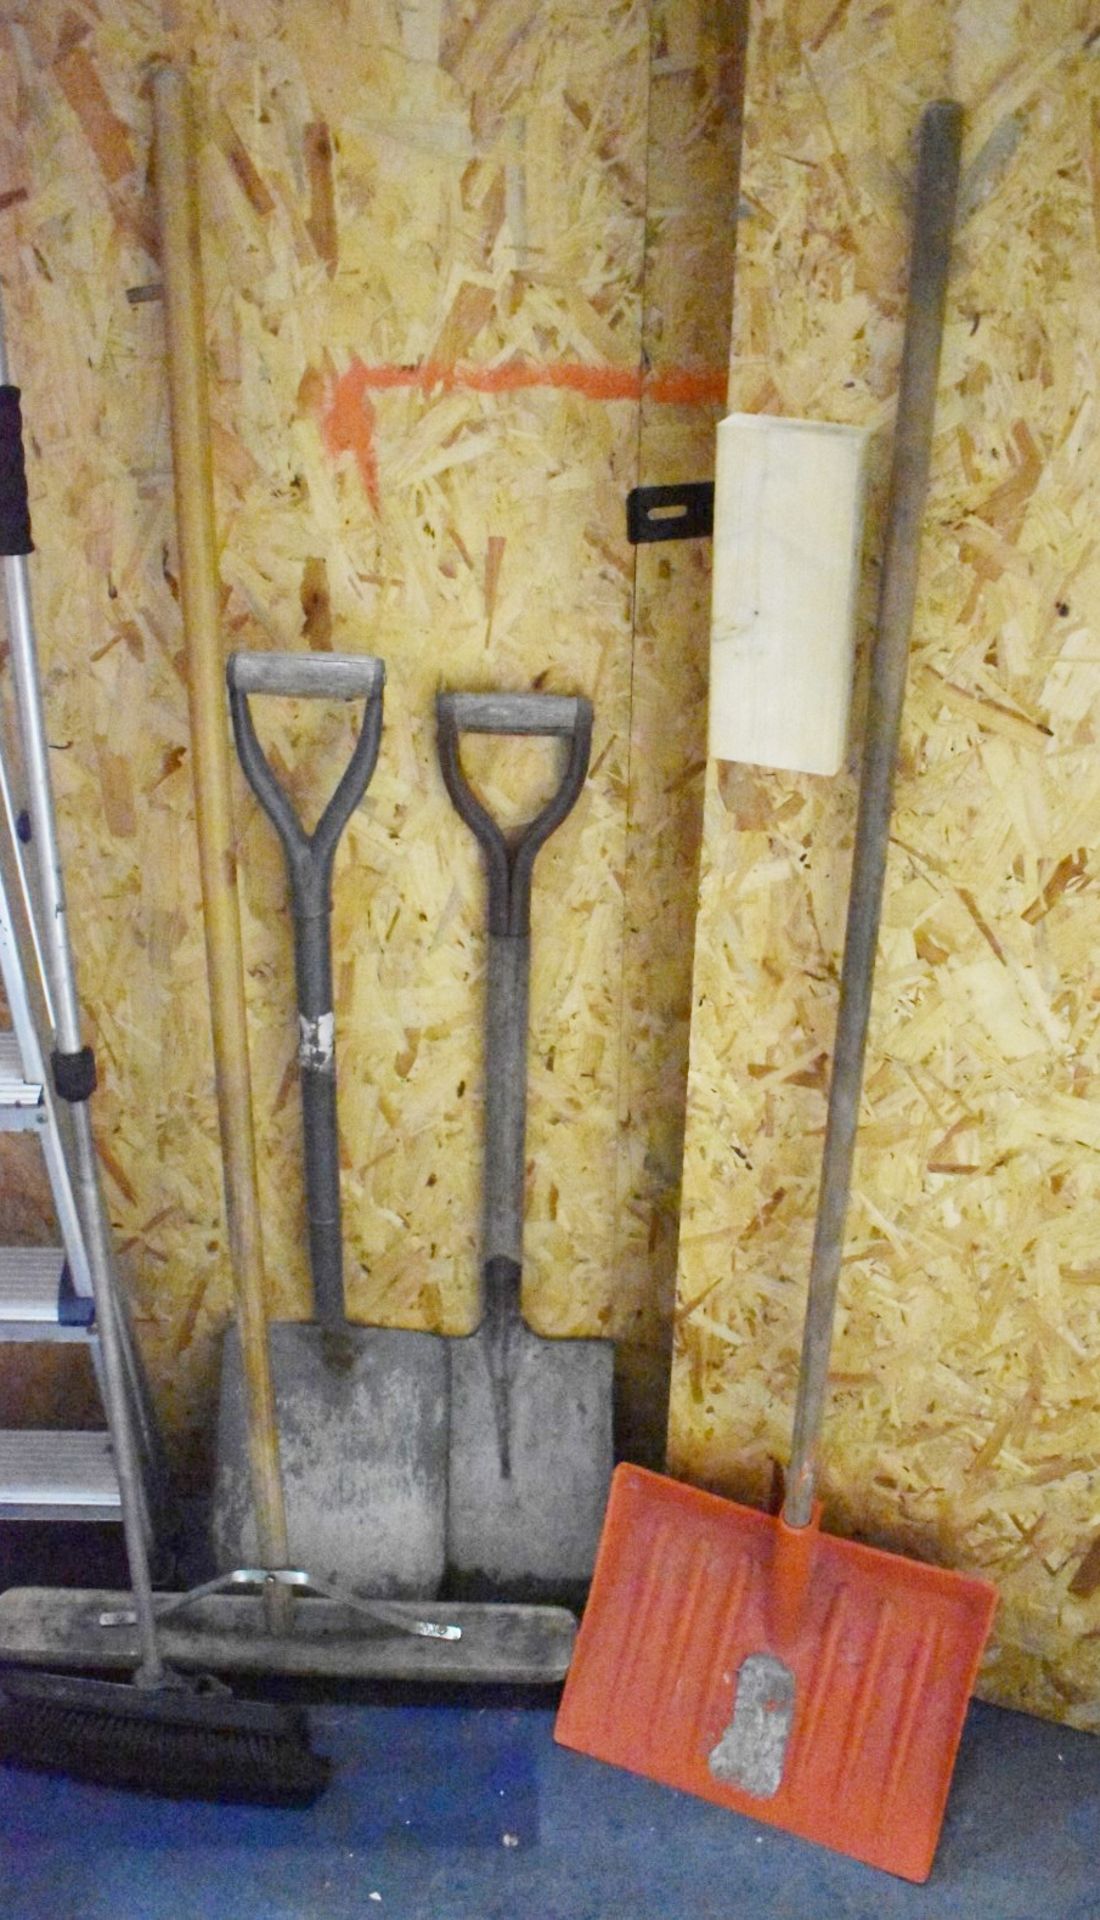 Assorted Collection to Include Ladders, Two Brushes and Three Shovels - Image 2 of 2